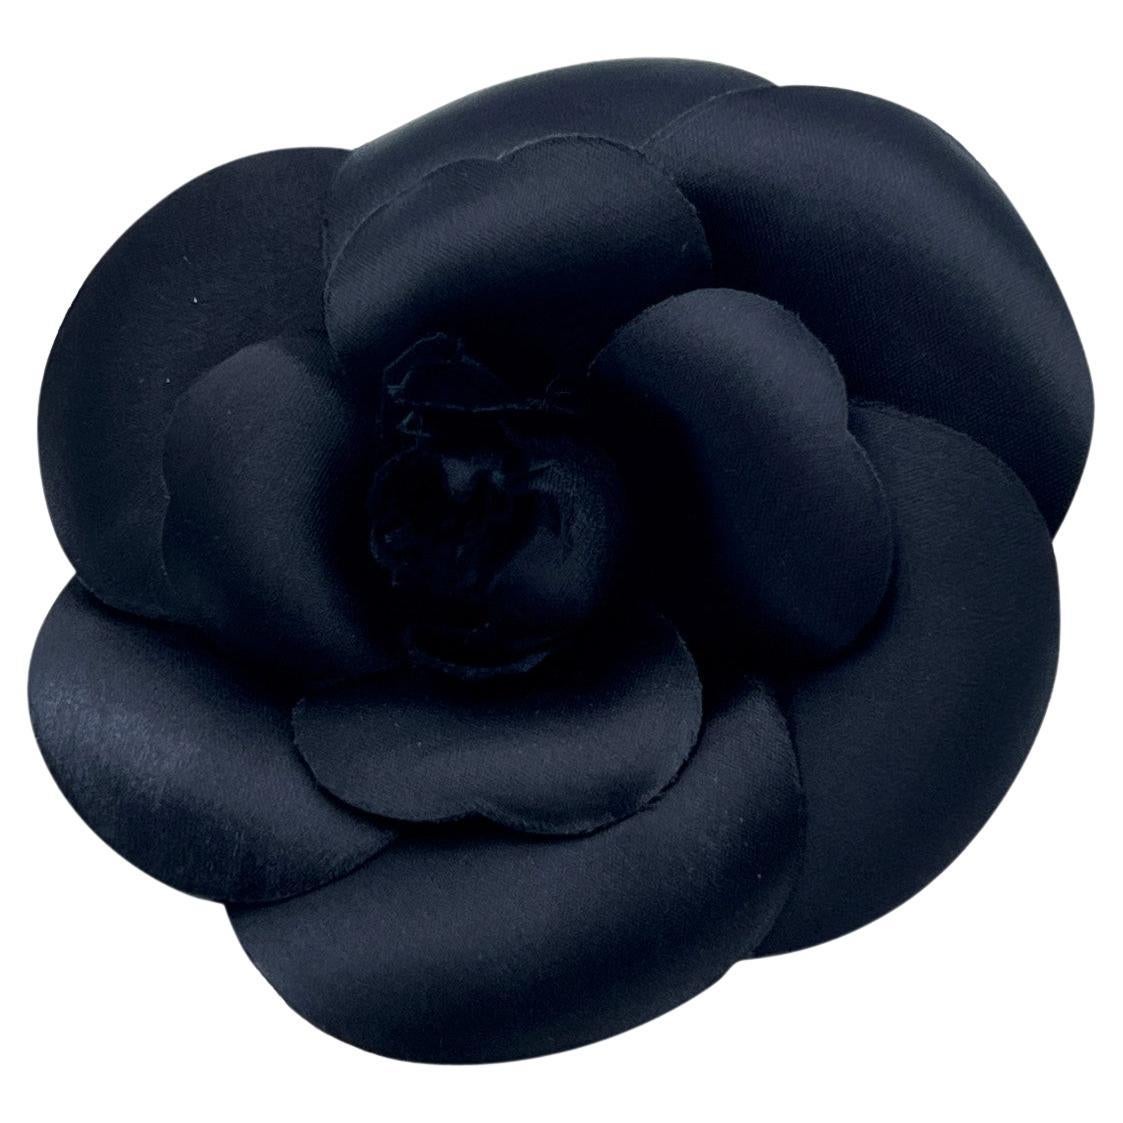 Chanel Vintage White and Black Silk Camelia Camellia Flower Pin Brooch